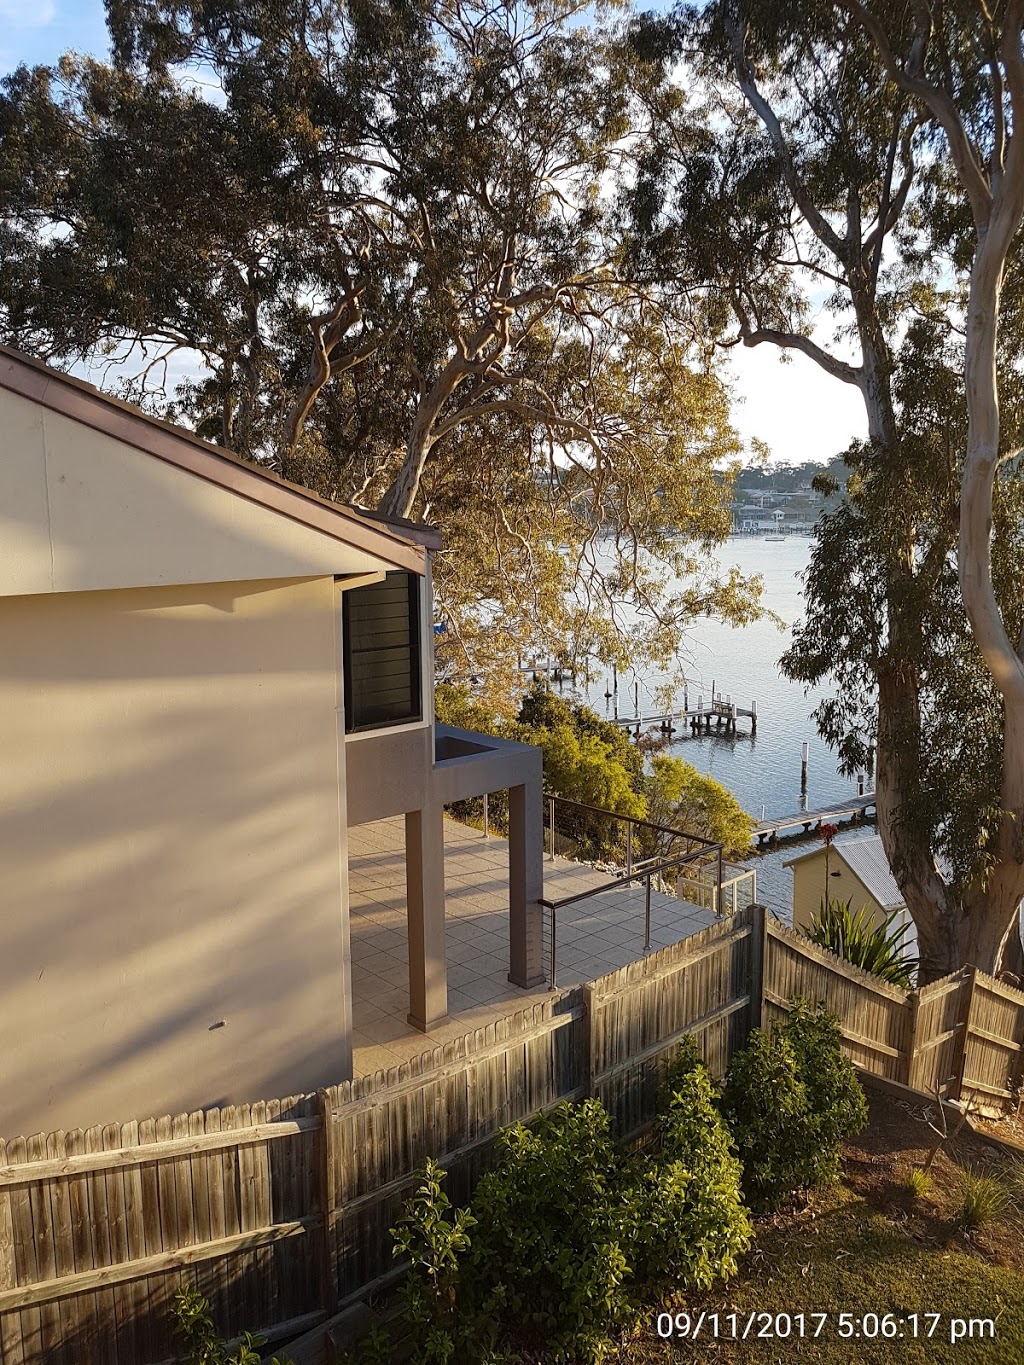 The Shack | lodging | 60 Daley Ave, Daleys Point NSW 2257, Australia